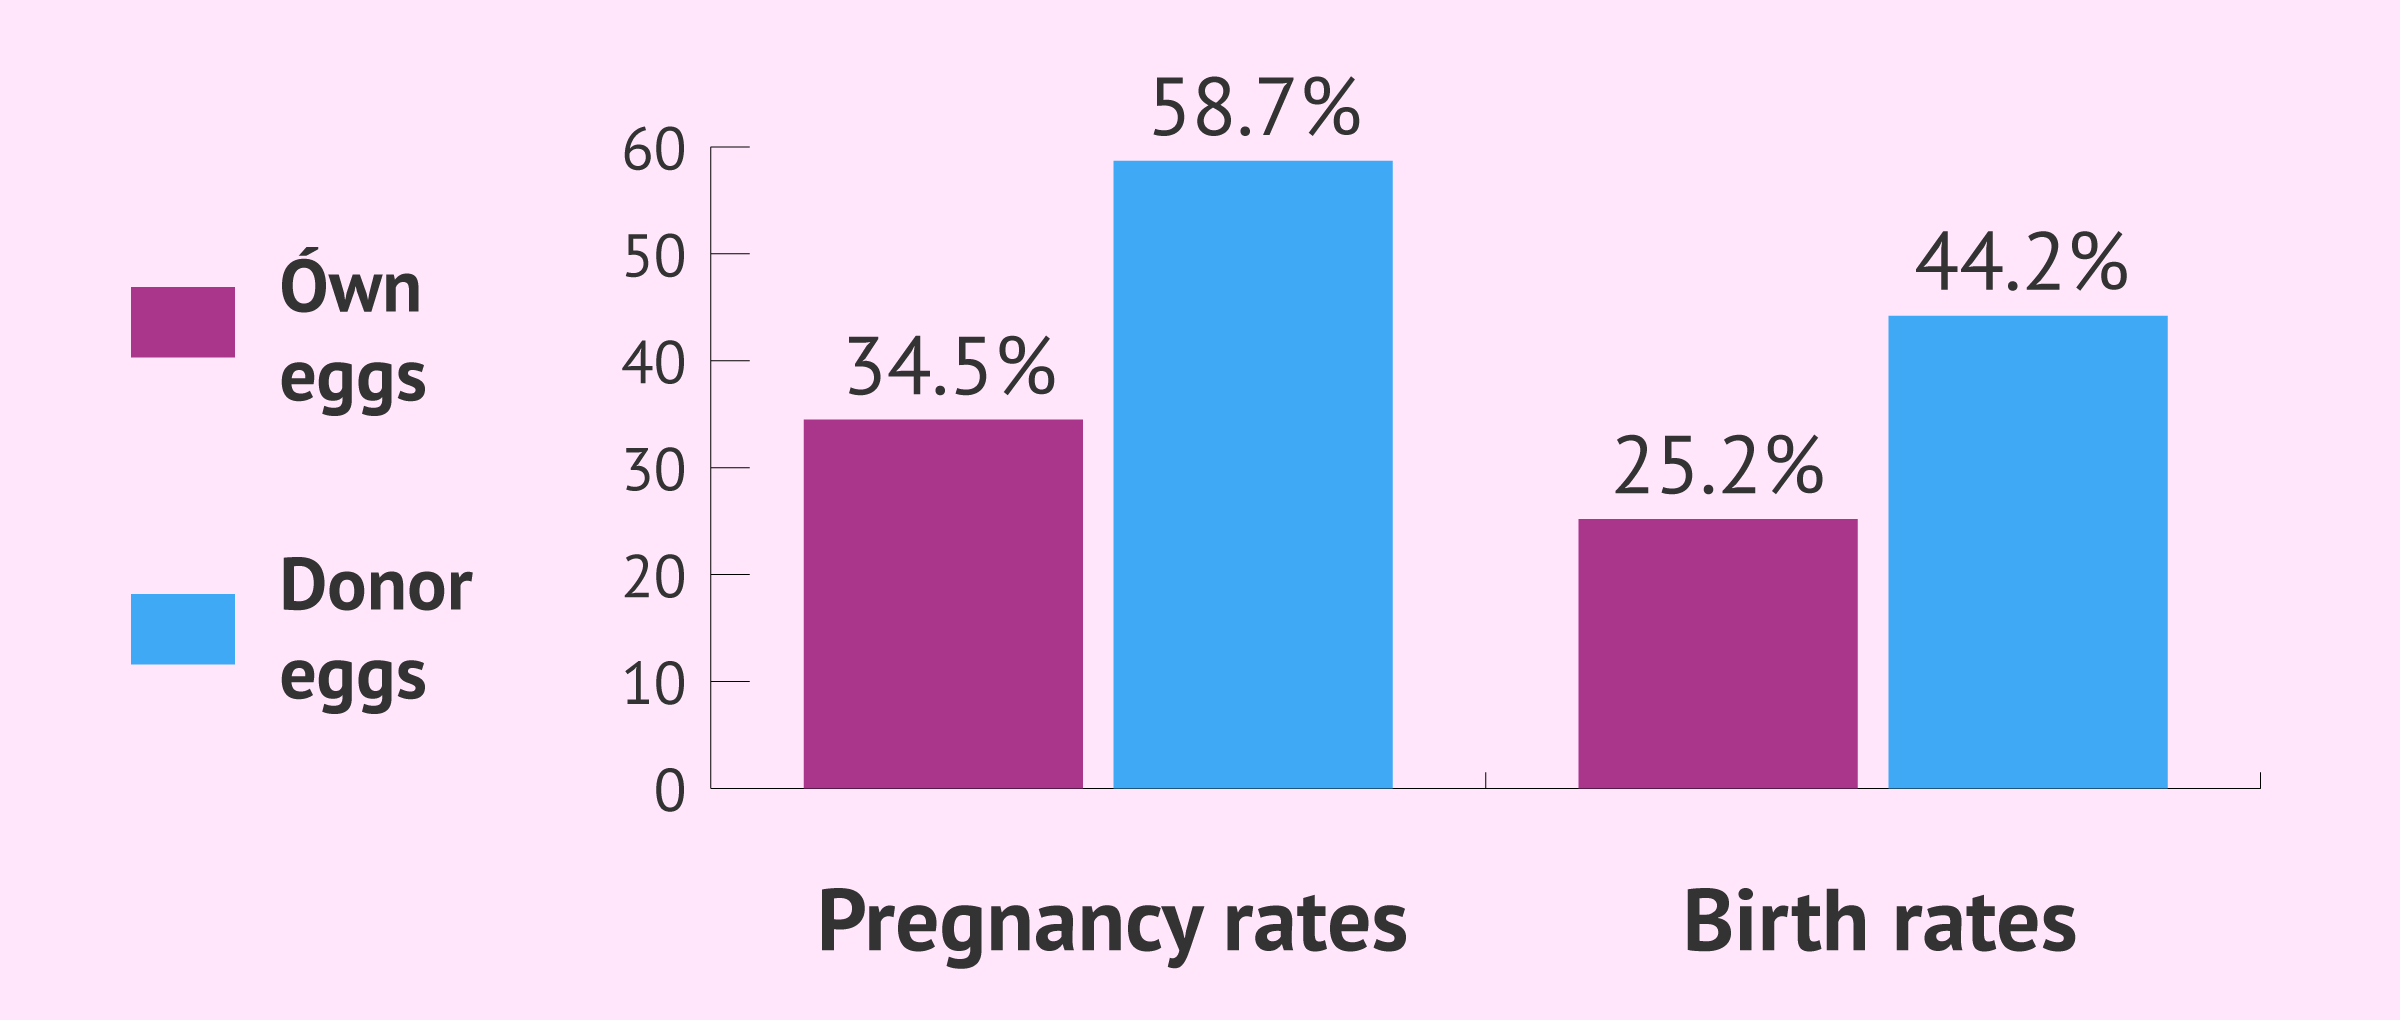 Success rates of IVF with own eggs vs donor eggs